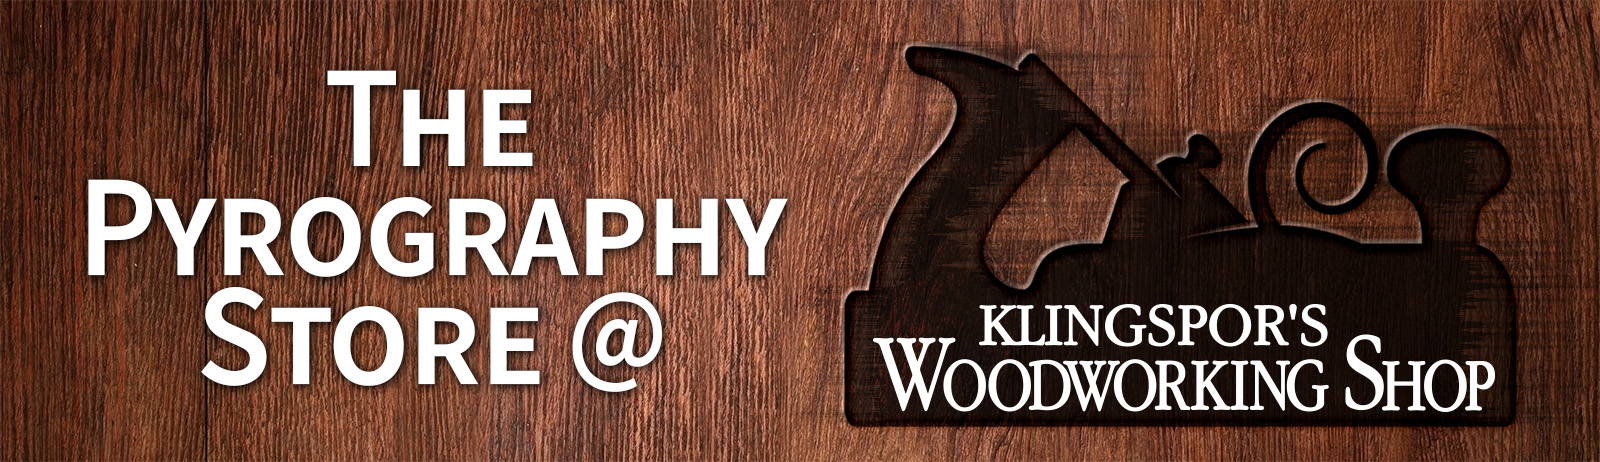 The Pyrography Store @ Klingspors Woodworking Shop